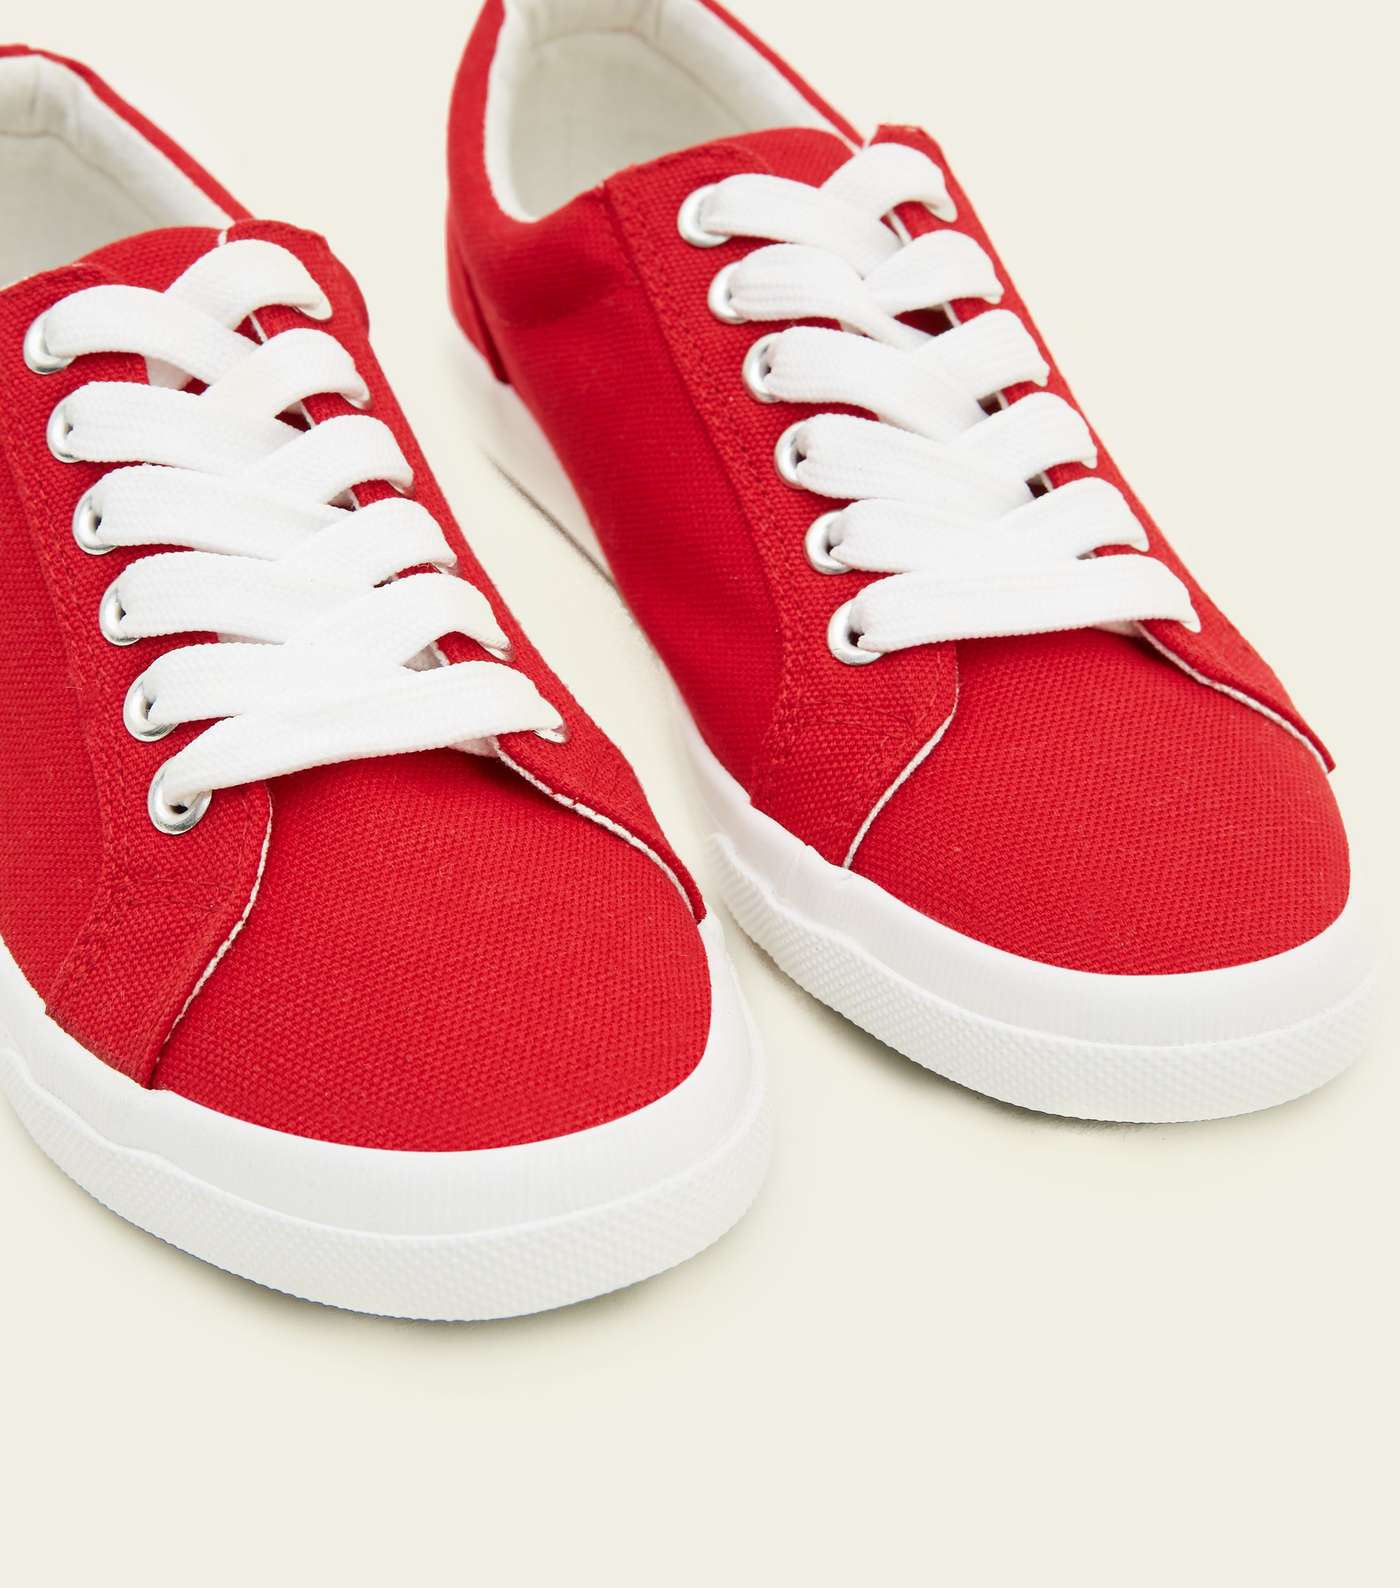 Girls Red Canvas Lace Up Trainers Image 3